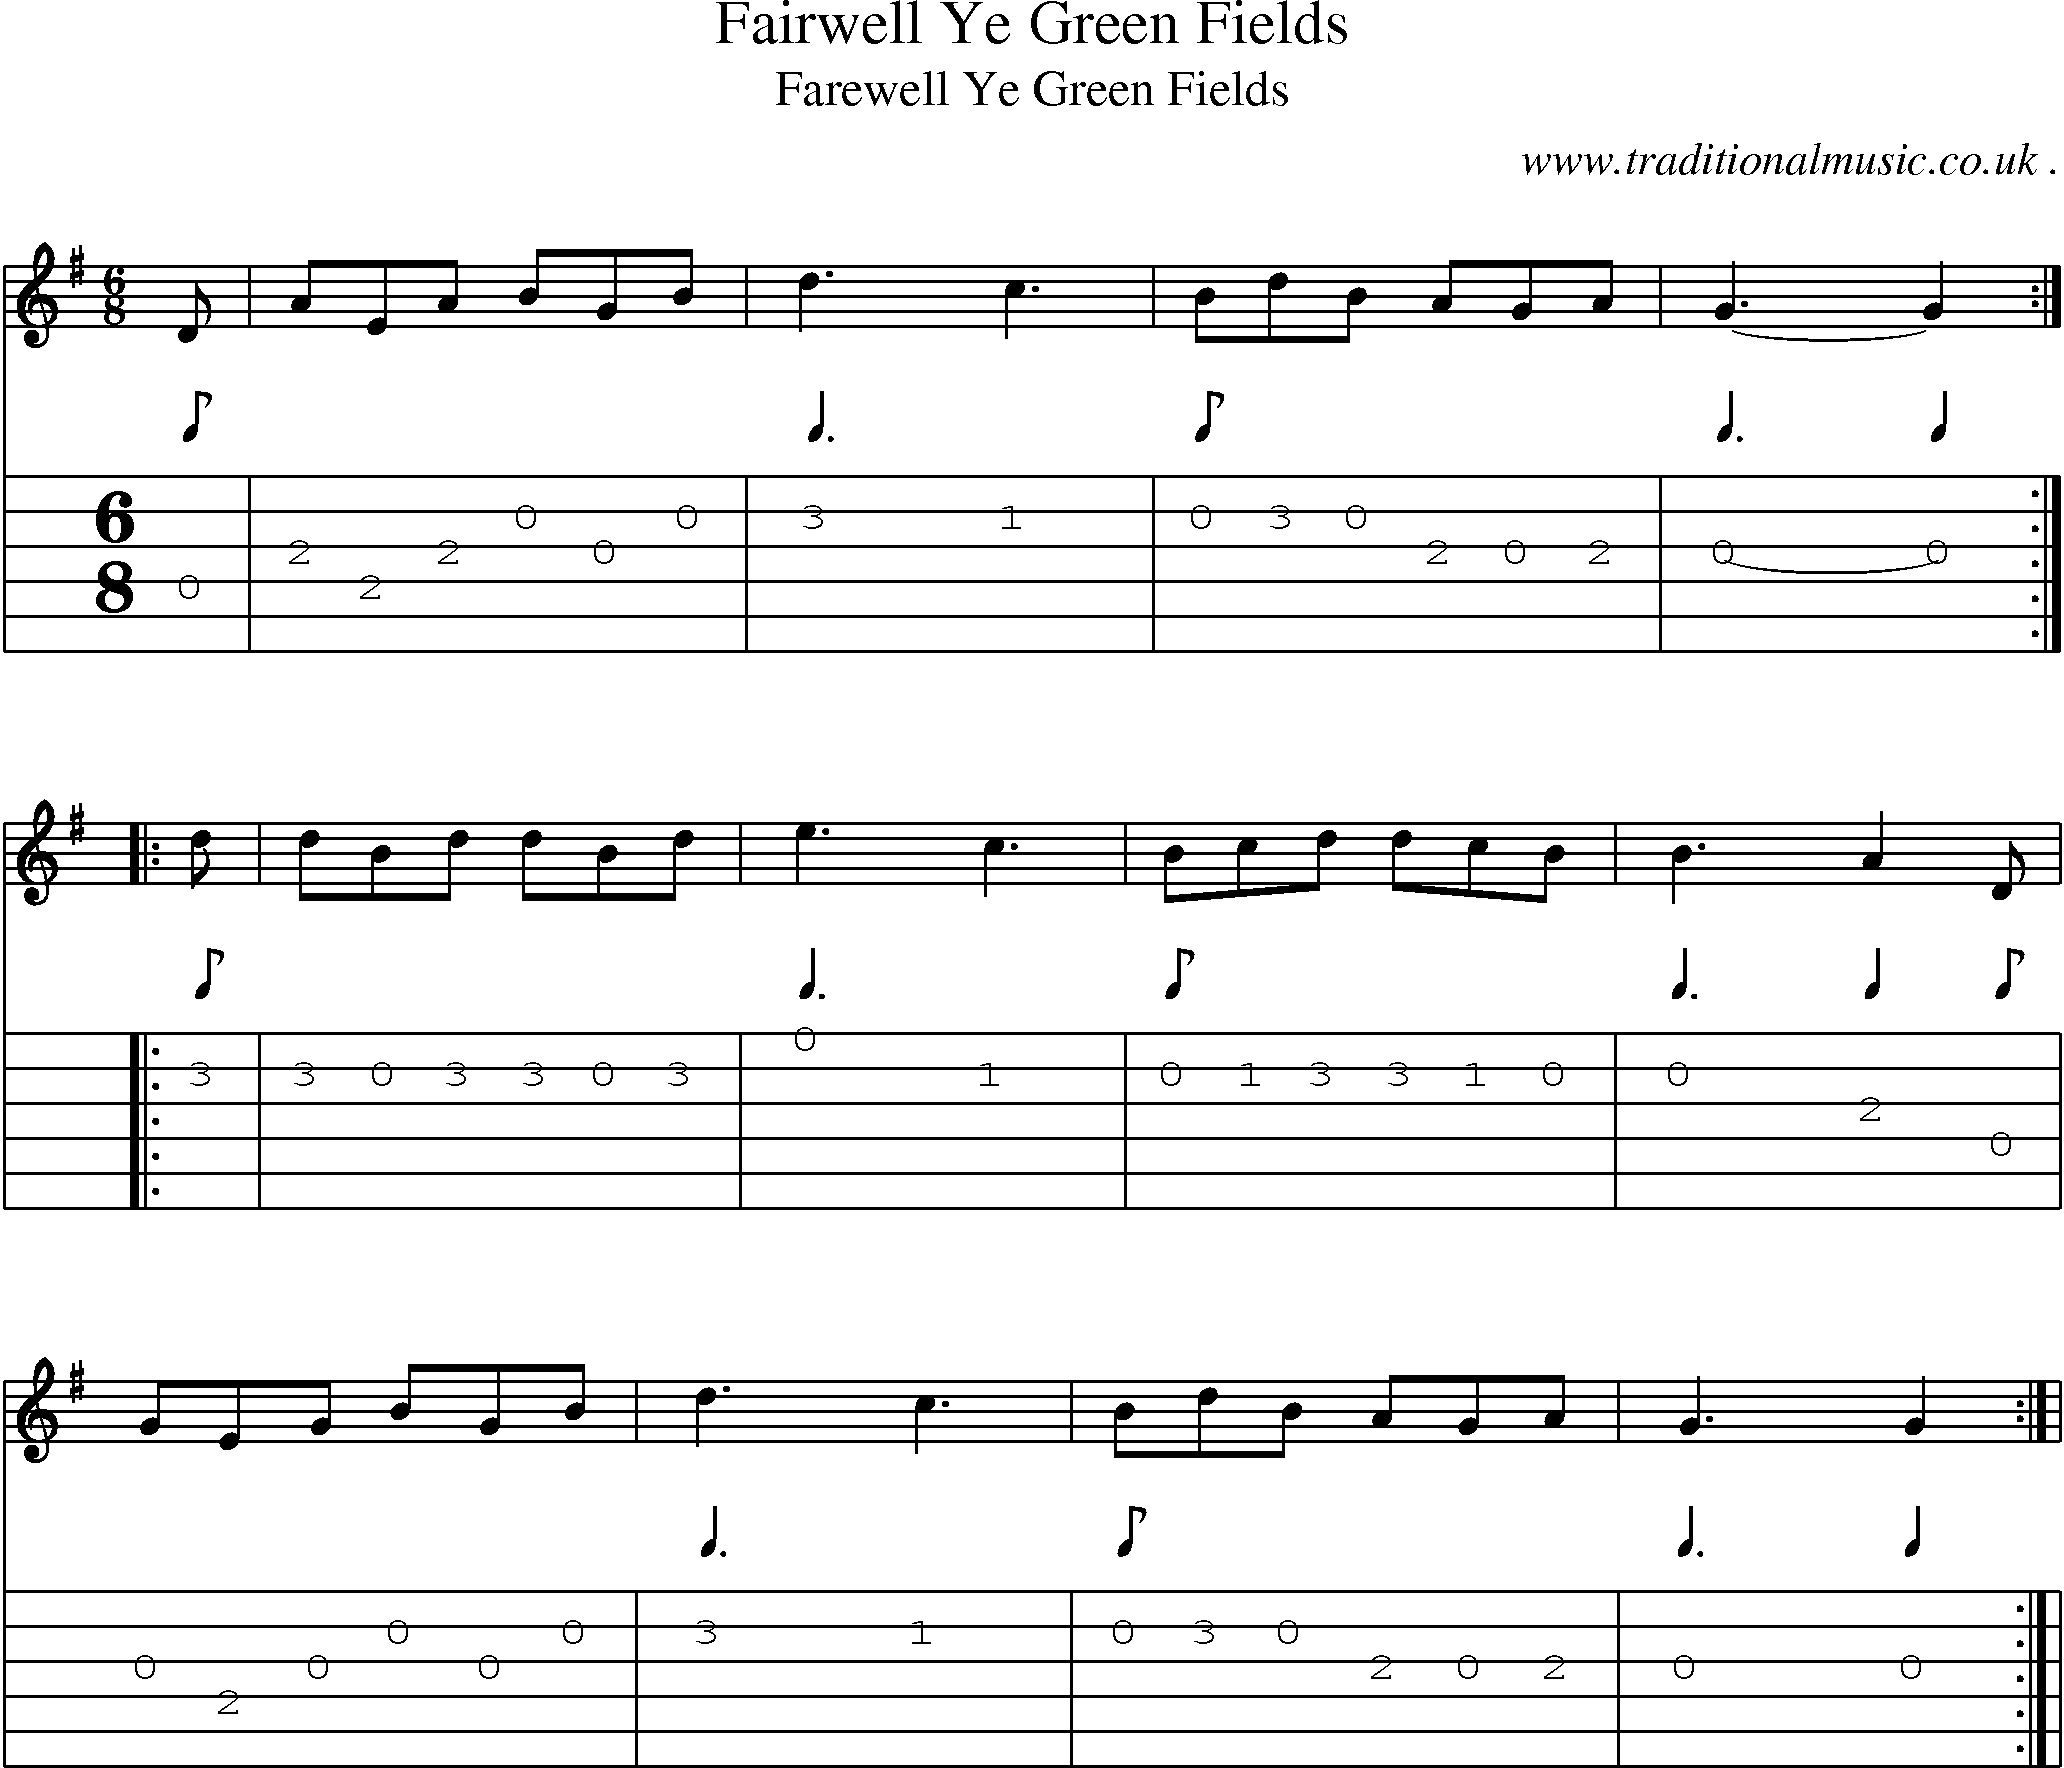 Sheet-Music and Guitar Tabs for Fairwell Ye Green Fields